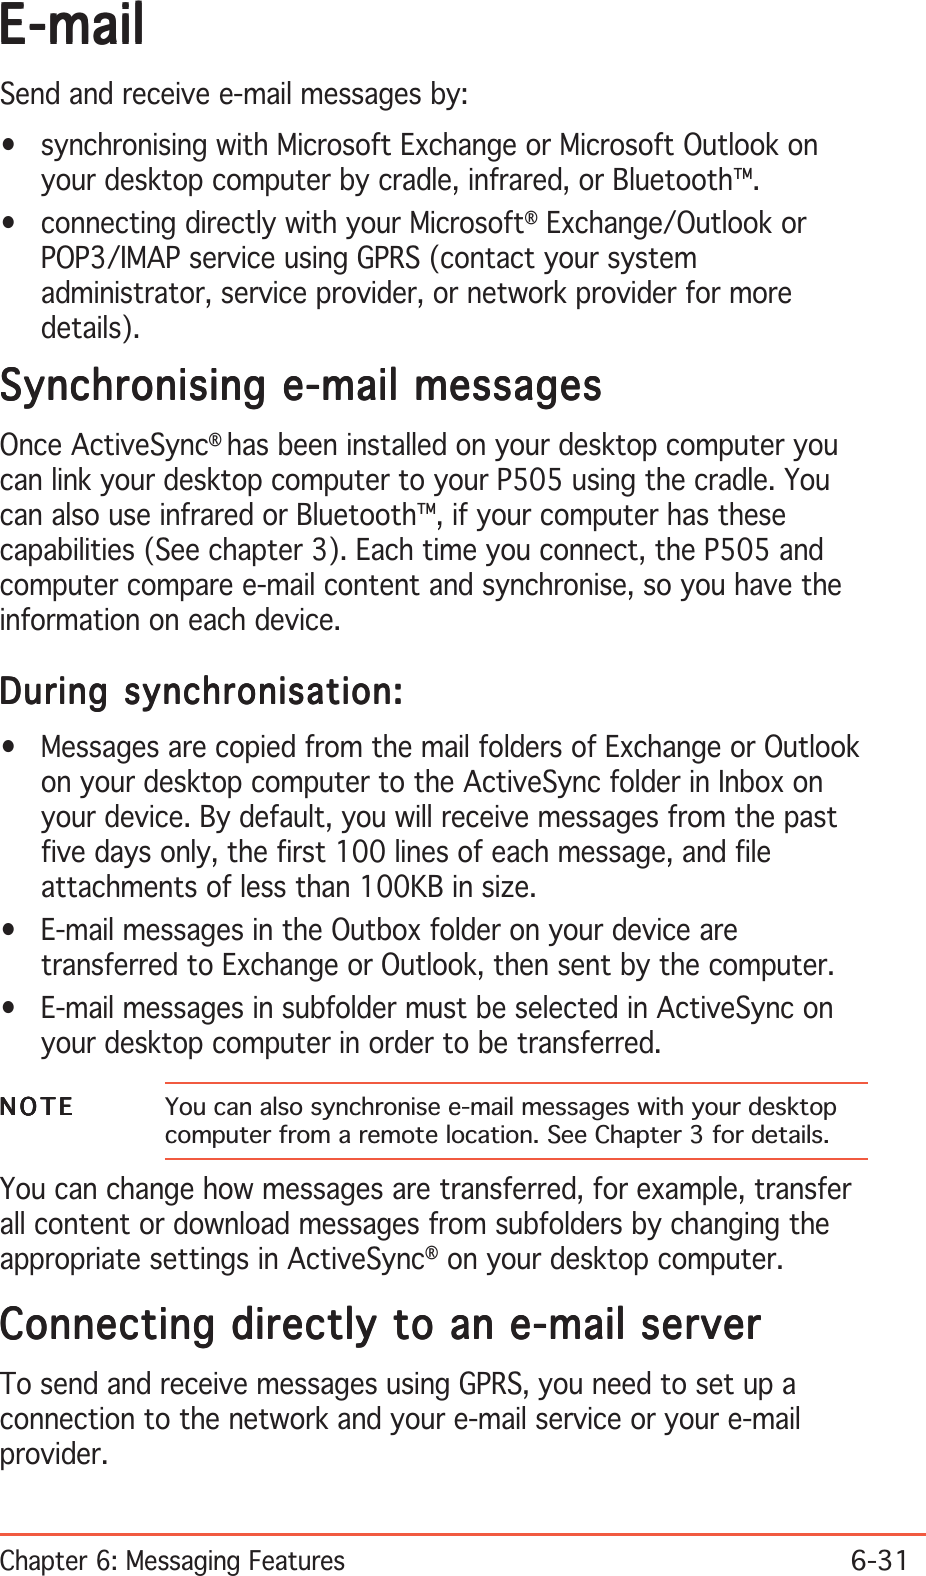 Chapter 6: Messaging Features6-31E-mailE-mailE-mailE-mailE-mailSend and receive e-mail messages by:• synchronising with Microsoft Exchange or Microsoft Outlook onyour desktop computer by cradle, infrared, or Bluetooth™.• connecting directly with your Microsoft® Exchange/Outlook orPOP3/IMAP service using GPRS (contact your systemadministrator, service provider, or network provider for moredetails).Synchronising e-mail messagesSynchronising e-mail messagesSynchronising e-mail messagesSynchronising e-mail messagesSynchronising e-mail messagesOnce ActiveSync®has been installed on your desktop computer youcan link your desktop computer to your P505 using the cradle. Youcan also use infrared or Bluetooth™, if your computer has thesecapabilities (See chapter 3). Each time you connect, the P505 andcomputer compare e-mail content and synchronise, so you have theinformation on each device.During synchronisation:During synchronisation:During synchronisation:During synchronisation:During synchronisation:• Messages are copied from the mail folders of Exchange or Outlookon your desktop computer to the ActiveSync folder in Inbox onyour device. By default, you will receive messages from the pastfive days only, the first 100 lines of each message, and fileattachments of less than 100KB in size.• E-mail messages in the Outbox folder on your device aretransferred to Exchange or Outlook, then sent by the computer.• E-mail messages in subfolder must be selected in ActiveSync onyour desktop computer in order to be transferred.NOTENOTENOTENOTEN O T E You can also synchronise e-mail messages with your desktopcomputer from a remote location. See Chapter 3 for details.You can change how messages are transferred, for example, transferall content or download messages from subfolders by changing theappropriate settings in ActiveSync® on your desktop computer.Connecting directly to an e-mail serverConnecting directly to an e-mail serverConnecting directly to an e-mail serverConnecting directly to an e-mail serverConnecting directly to an e-mail serverTo send and receive messages using GPRS, you need to set up aconnection to the network and your e-mail service or your e-mailprovider.